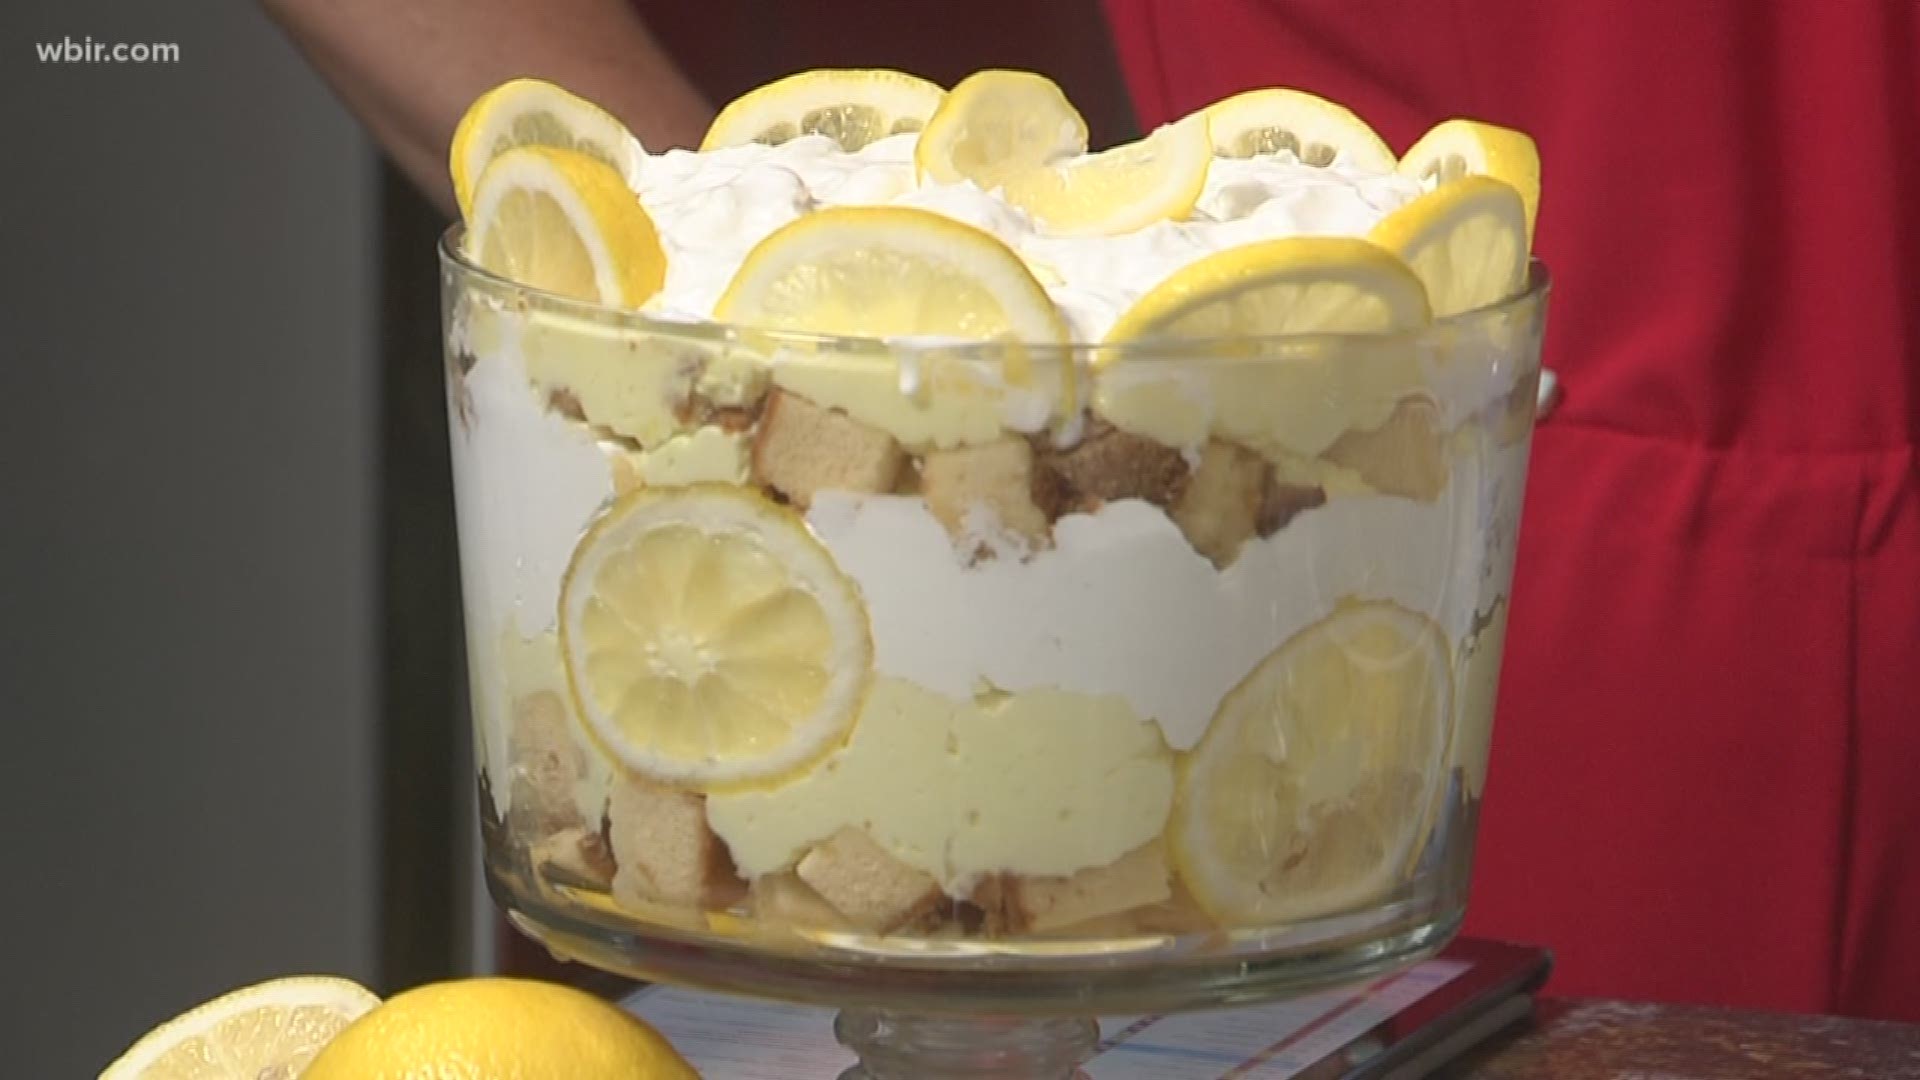 Pam with Buffalo Mountain Grille shares an easy, cool and delicious recipe for a lemon trifle. Buffalo Mountain Grille is located at 205 Oak Ridge Turnpike in Oak Ridge. Visit buffalogrille.com to learn more. July 15, 2019-4pm.